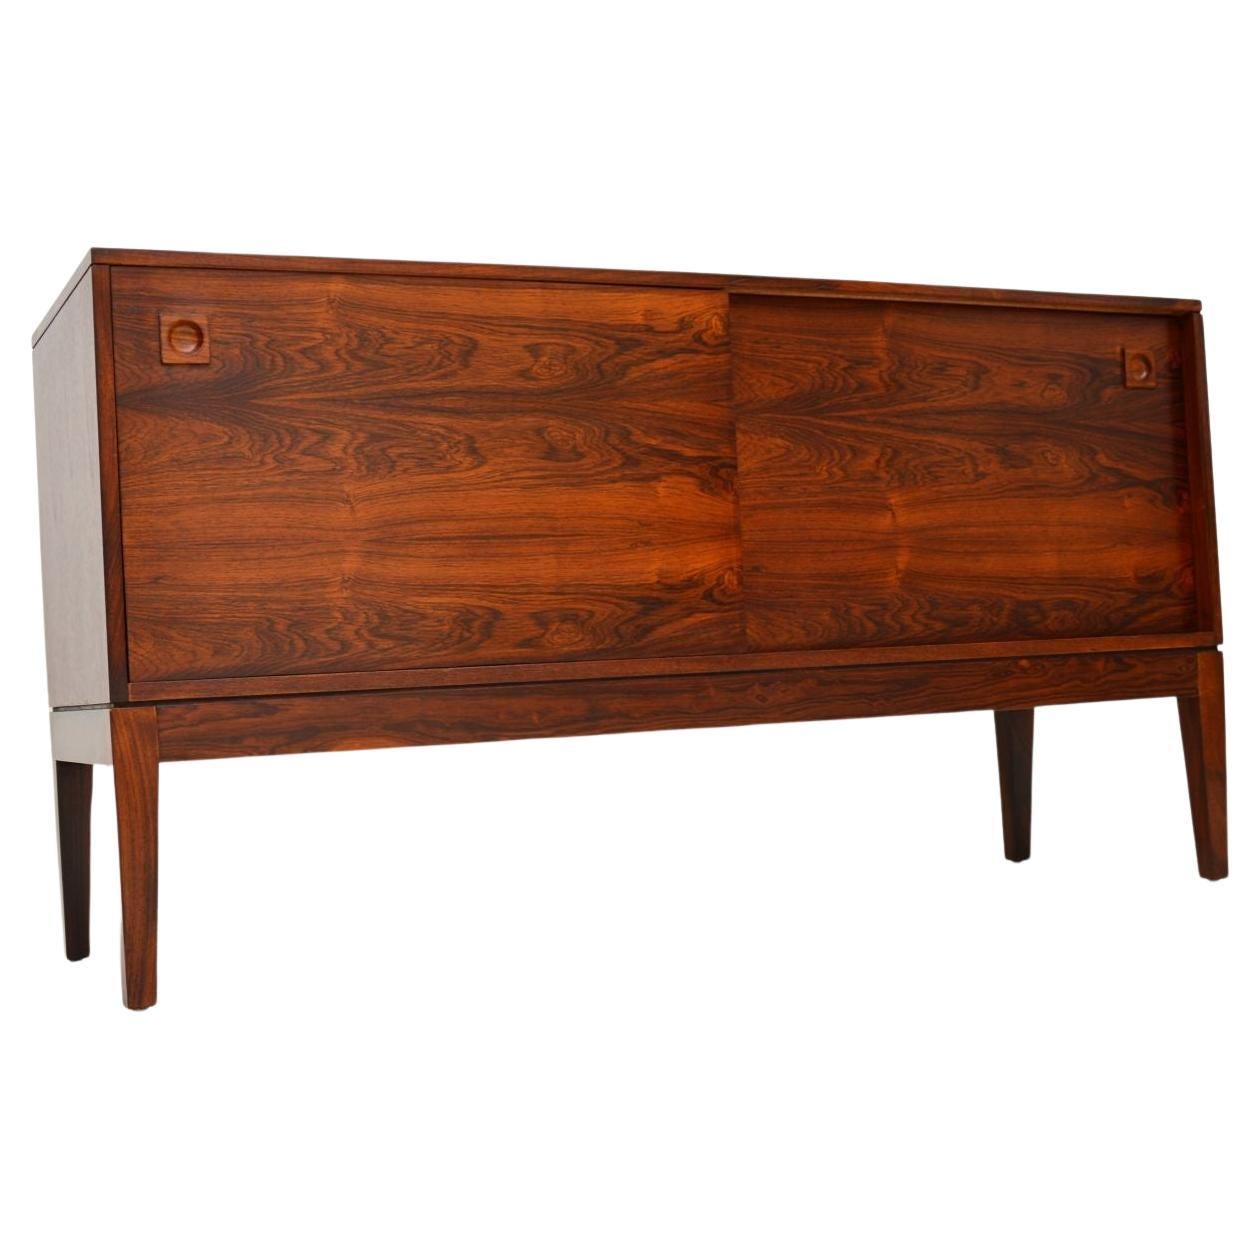 1960s Vintage Sideboard by Robert Heritage for Archie Shine